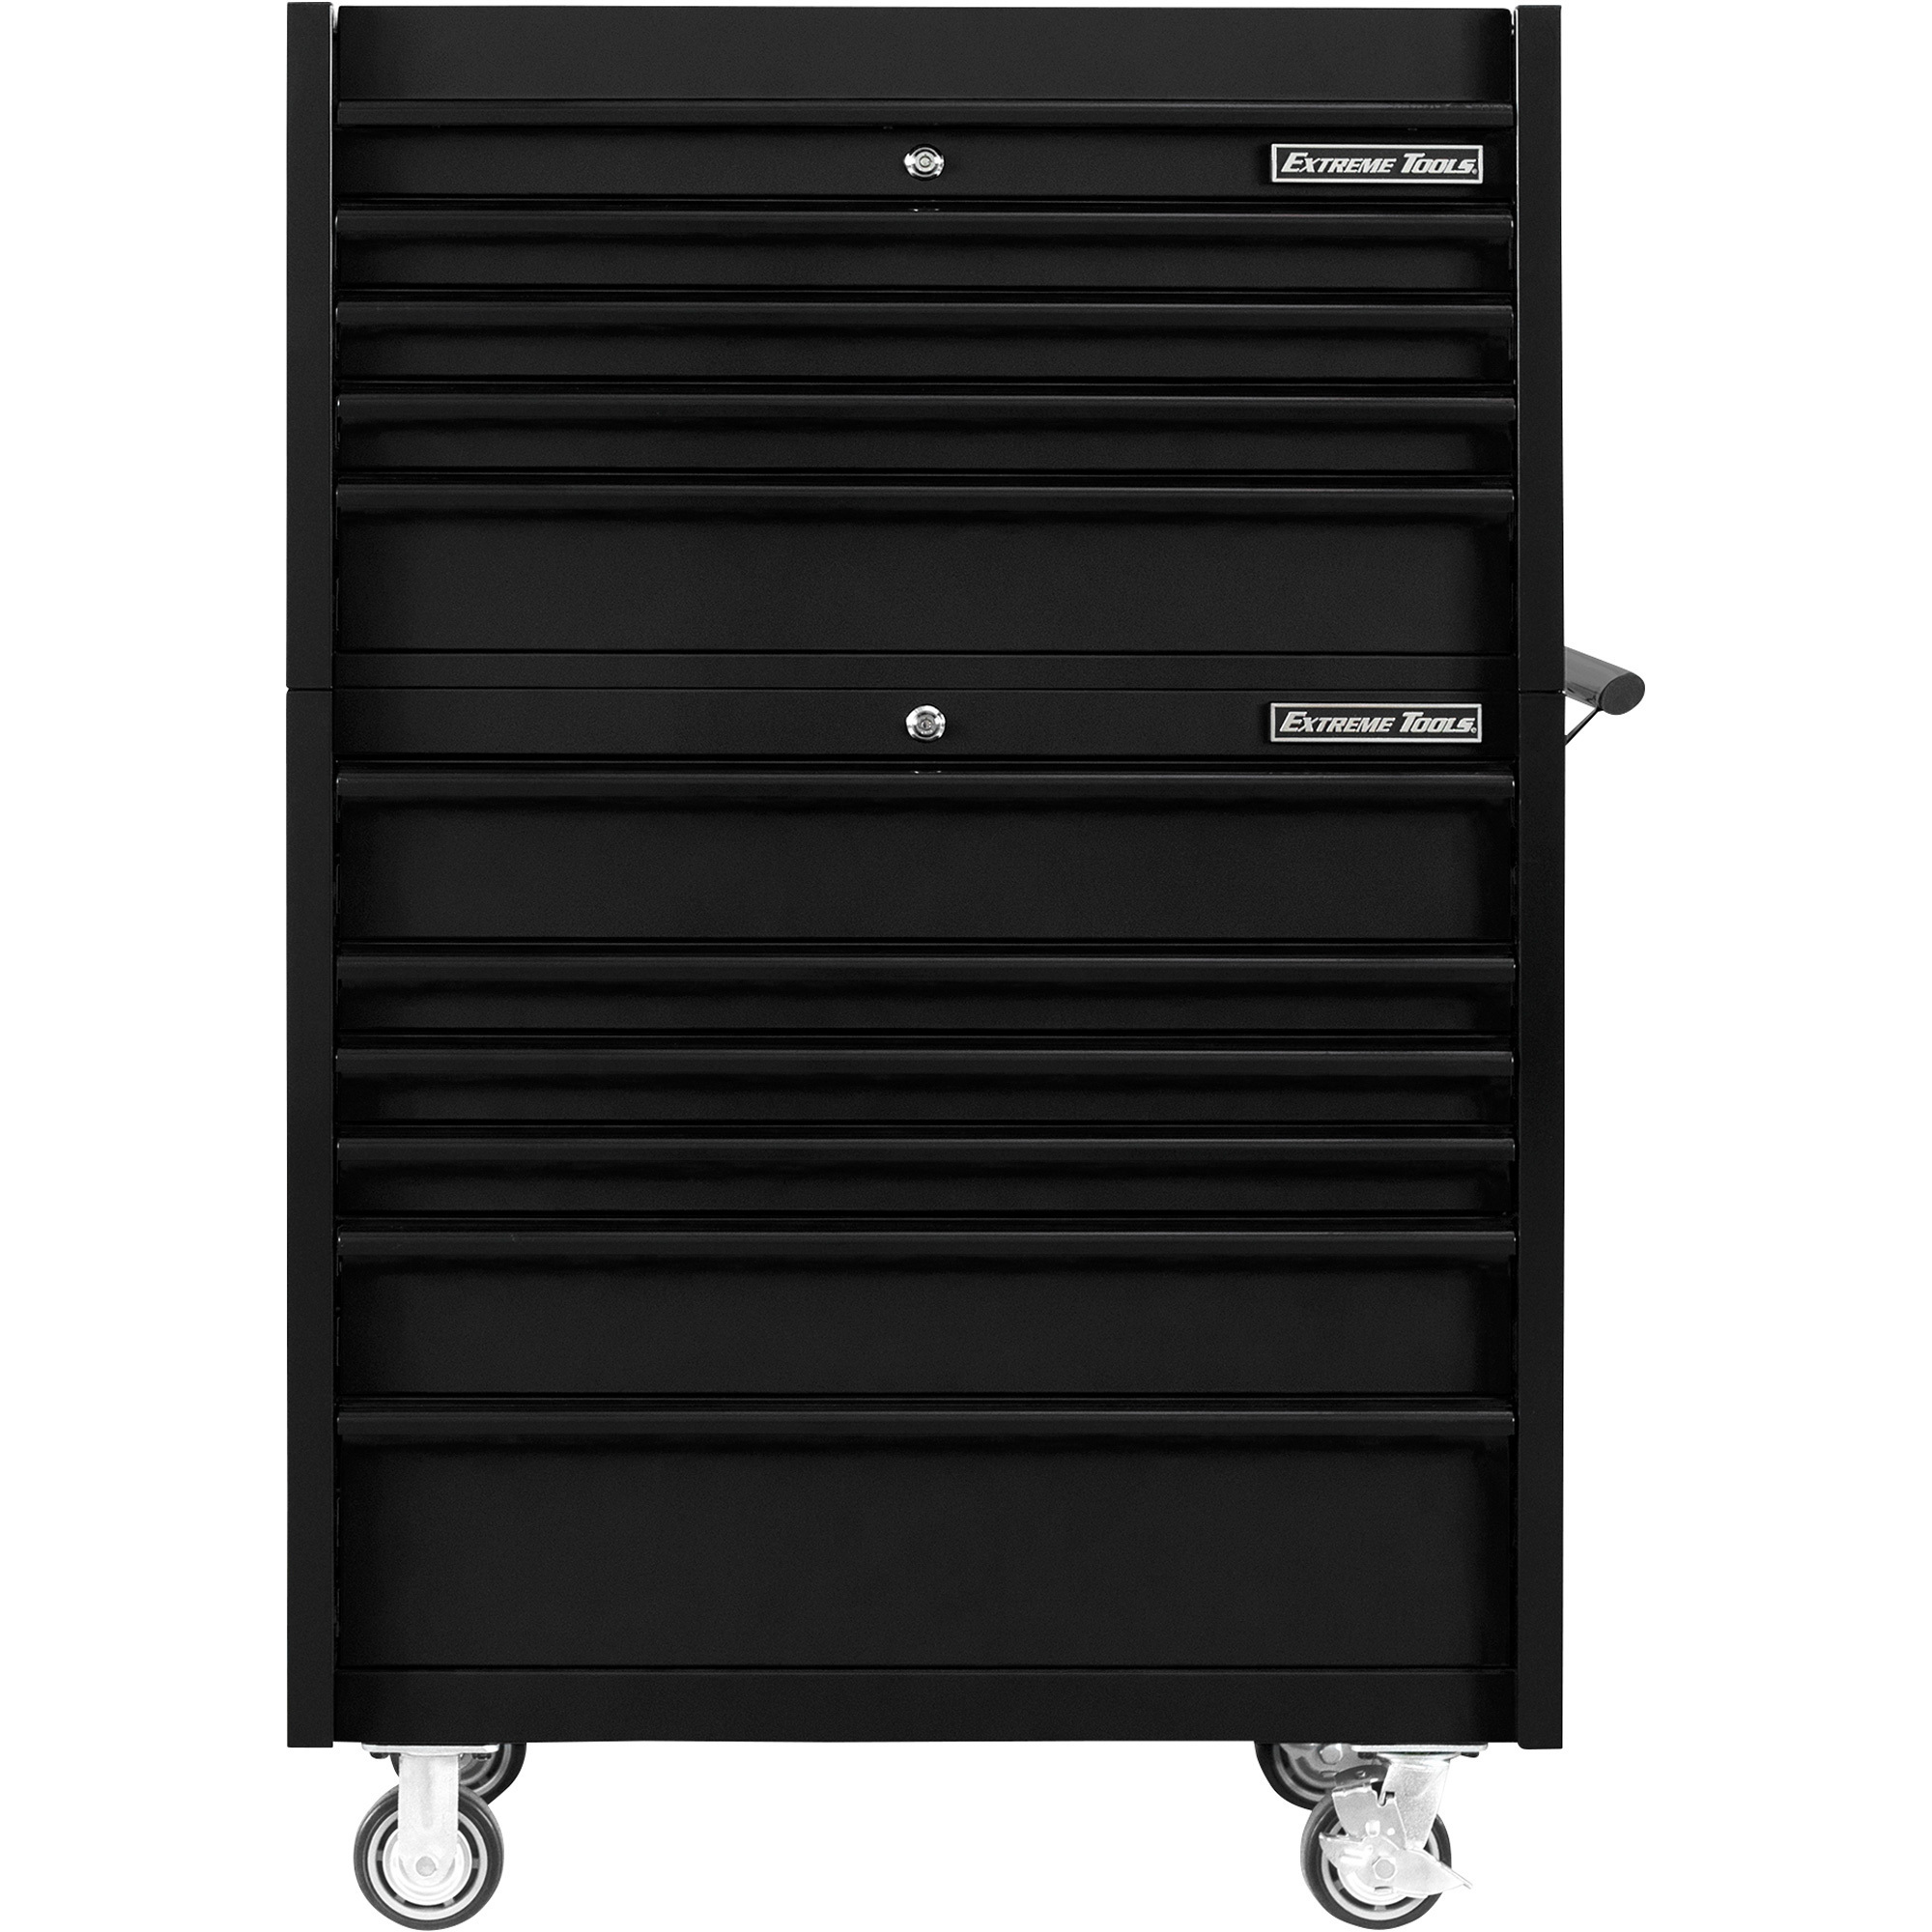 4-Drawer Top Chest//6-Drawer Roller Cabinet Combo — 41Inch W x 25Inch D x 64Inch H, Matte Black, Model - Extreme Tools DX4110CRMK